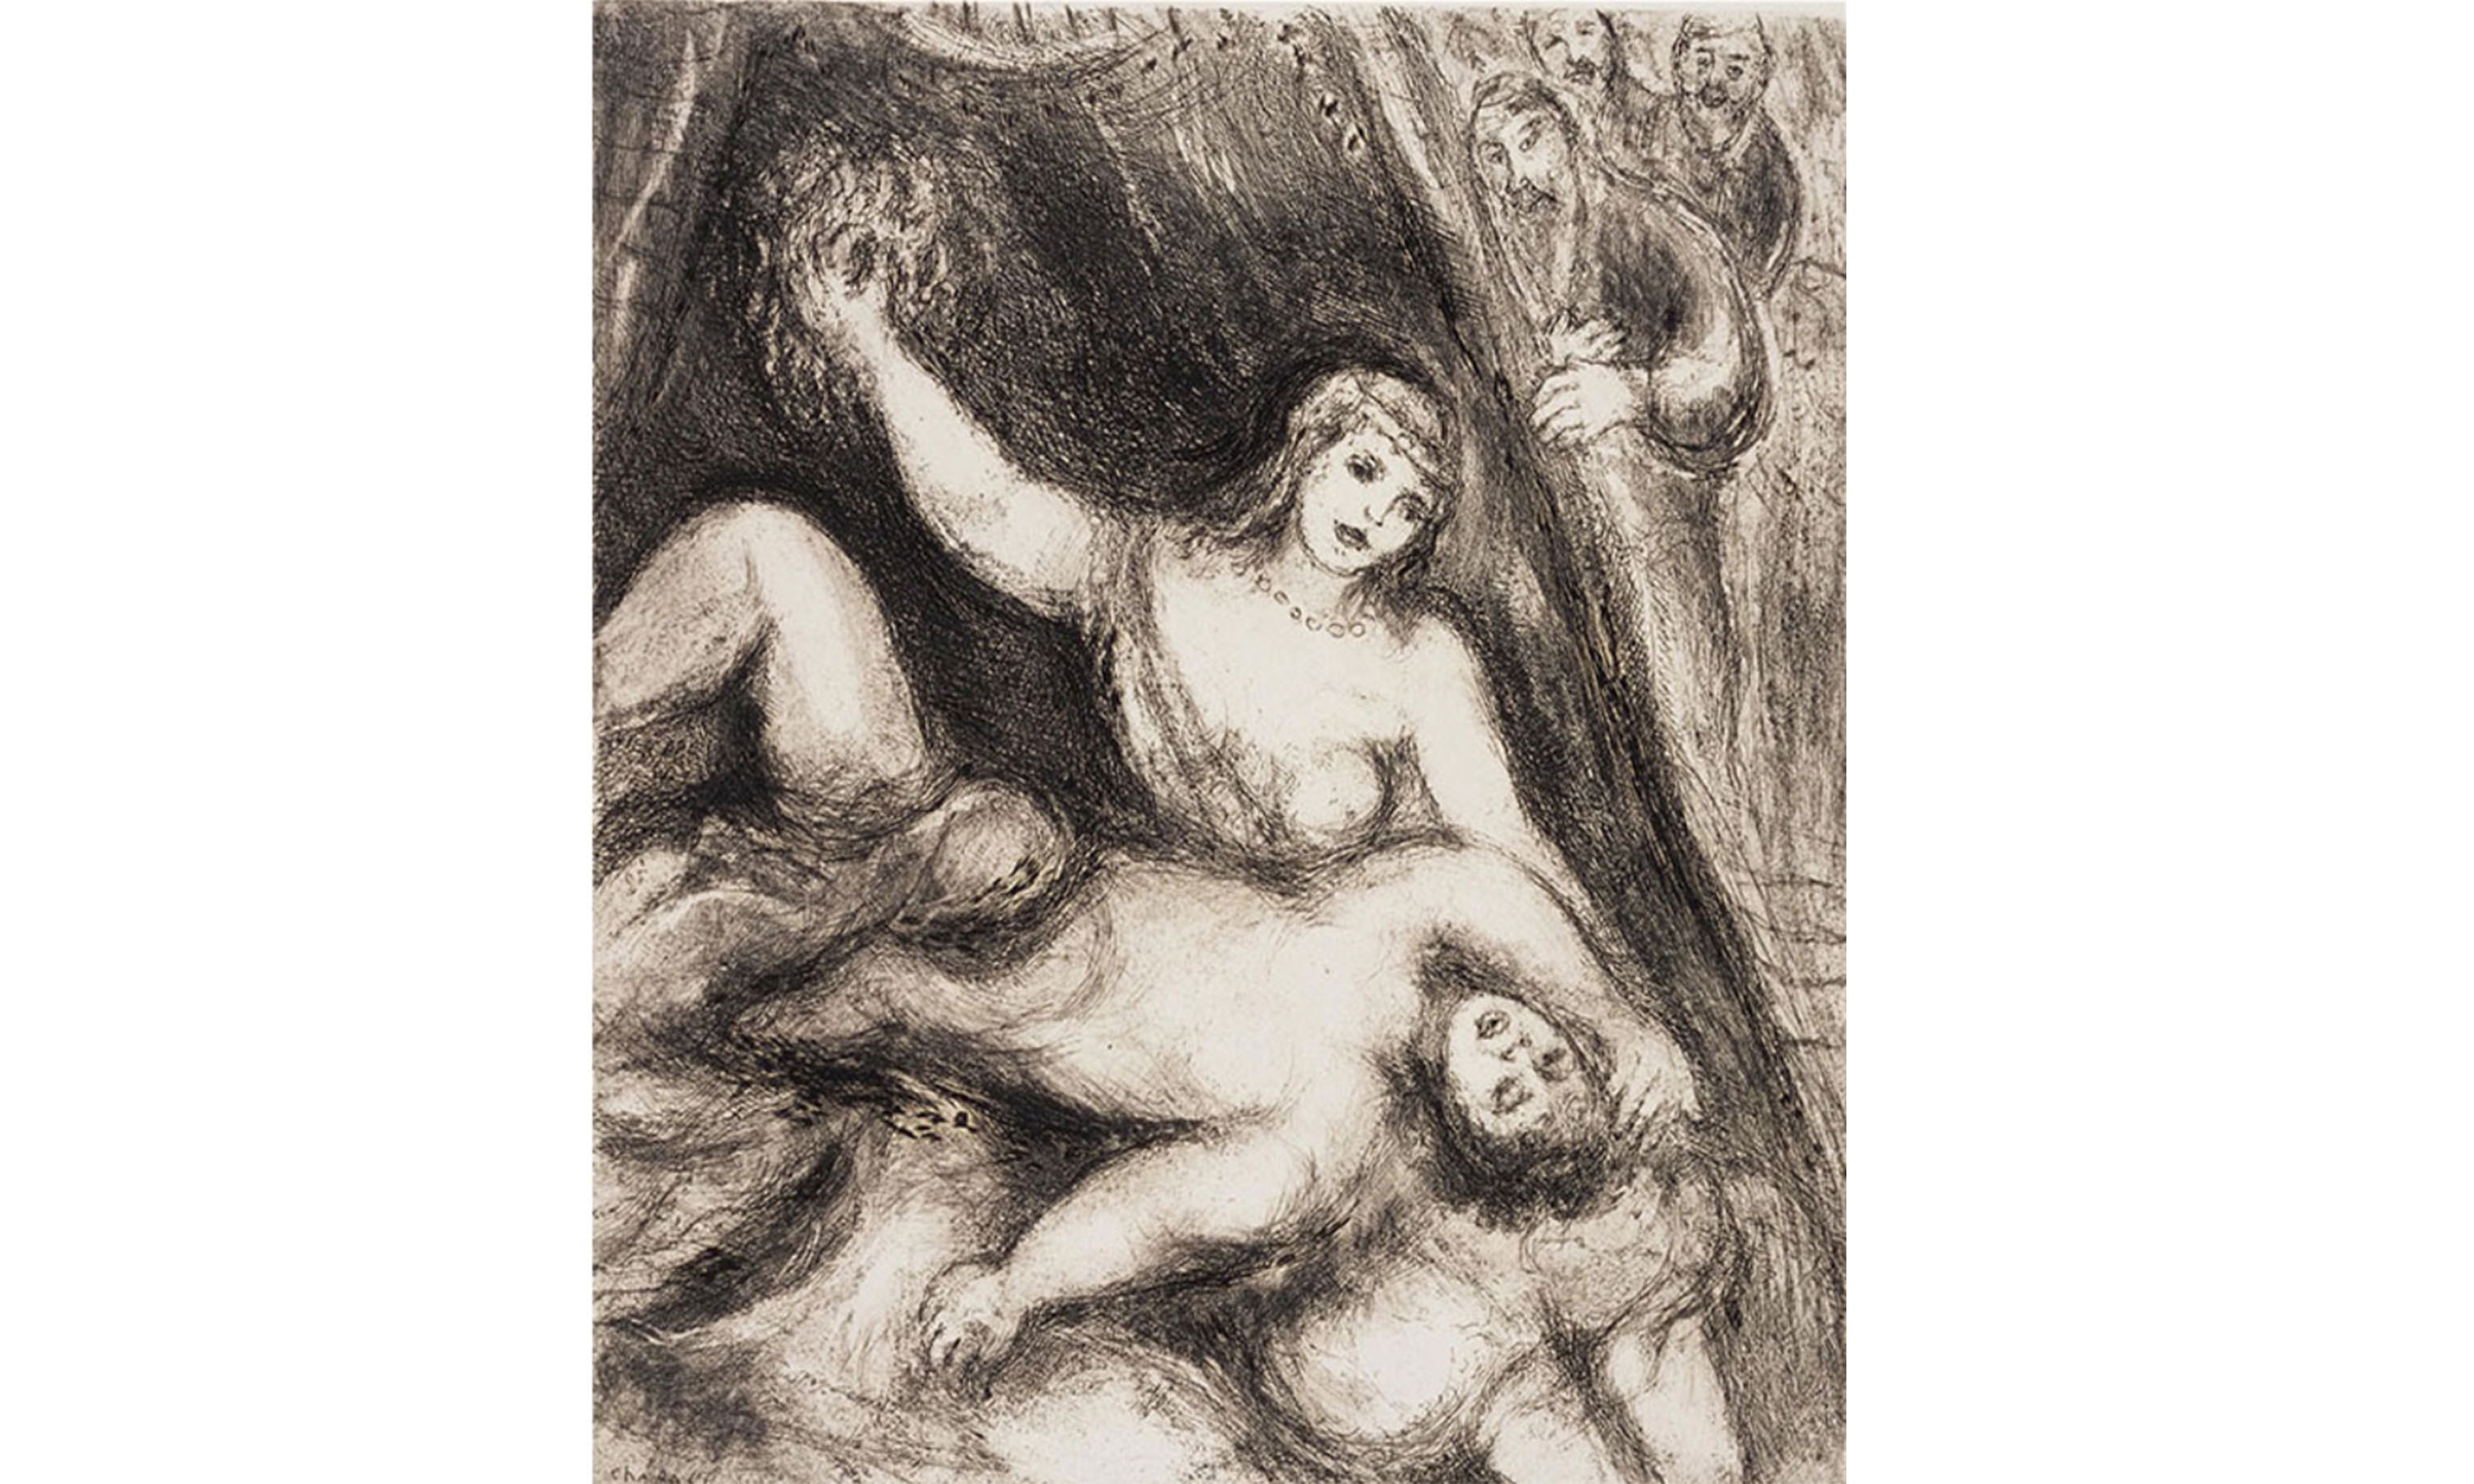 Samson and Delilah from the Bible series by Chagall